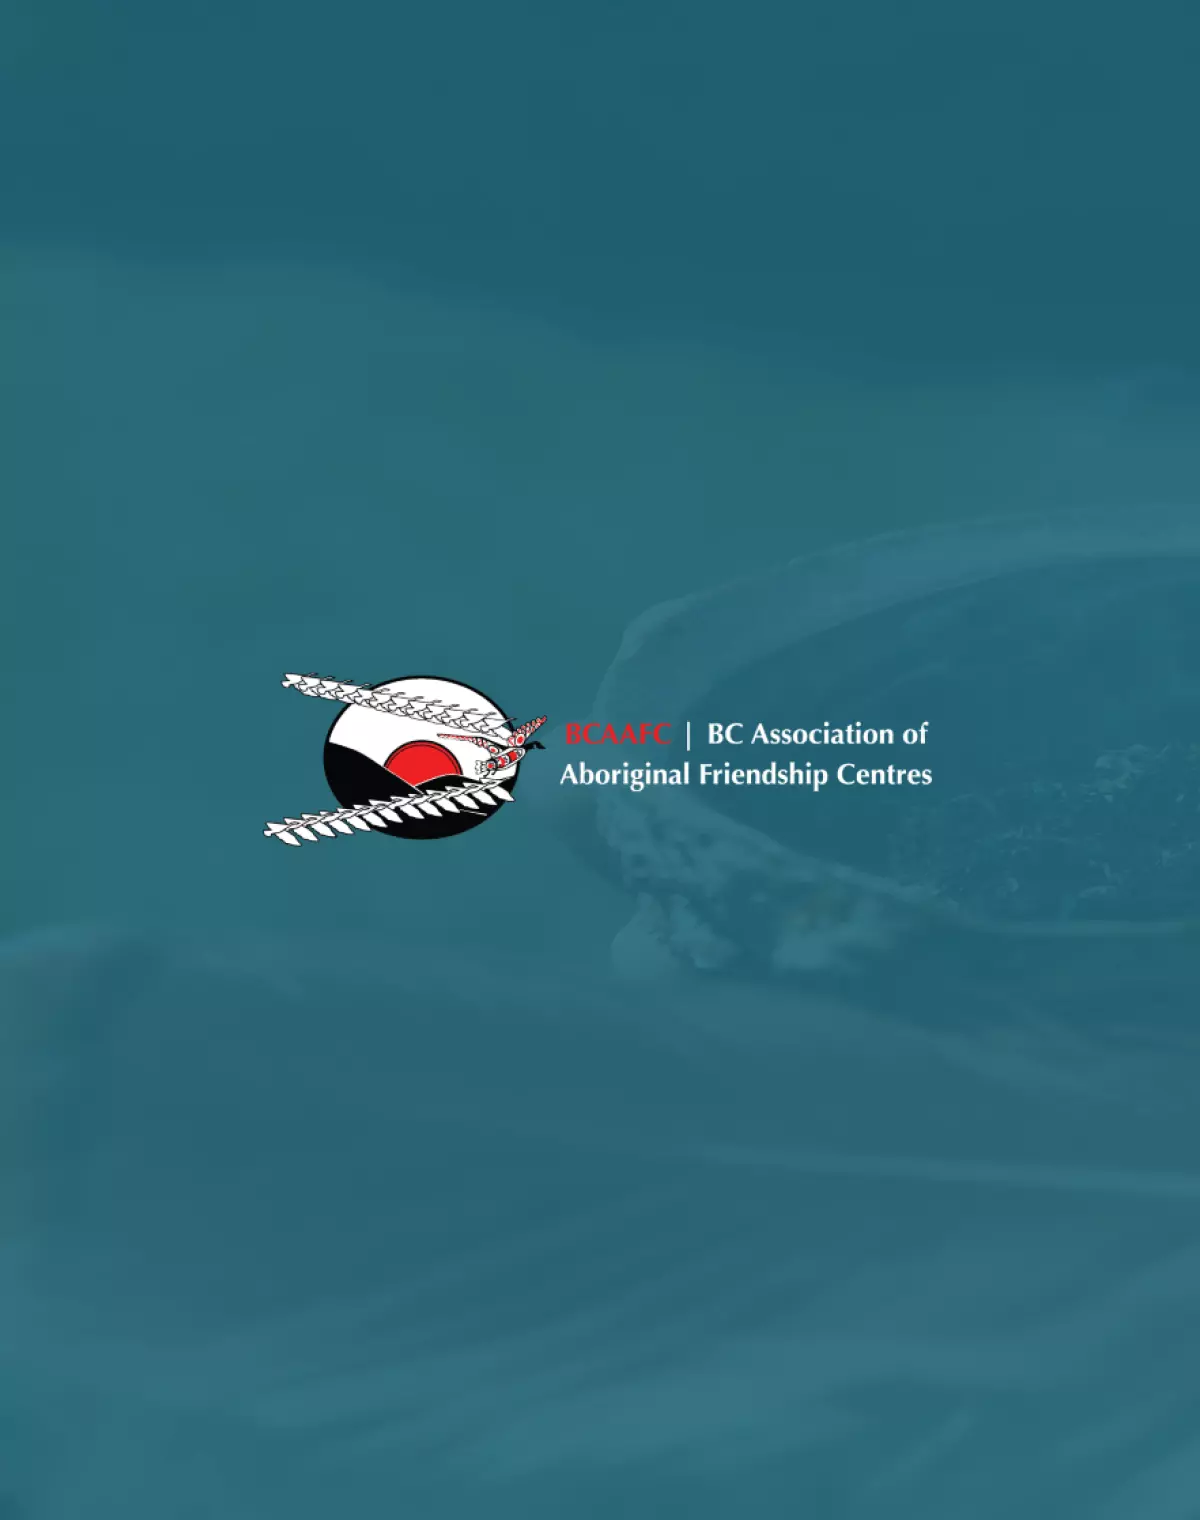 BC Association of Aboriginal Friendship Centres logo button over top of an image of an abalone shell.